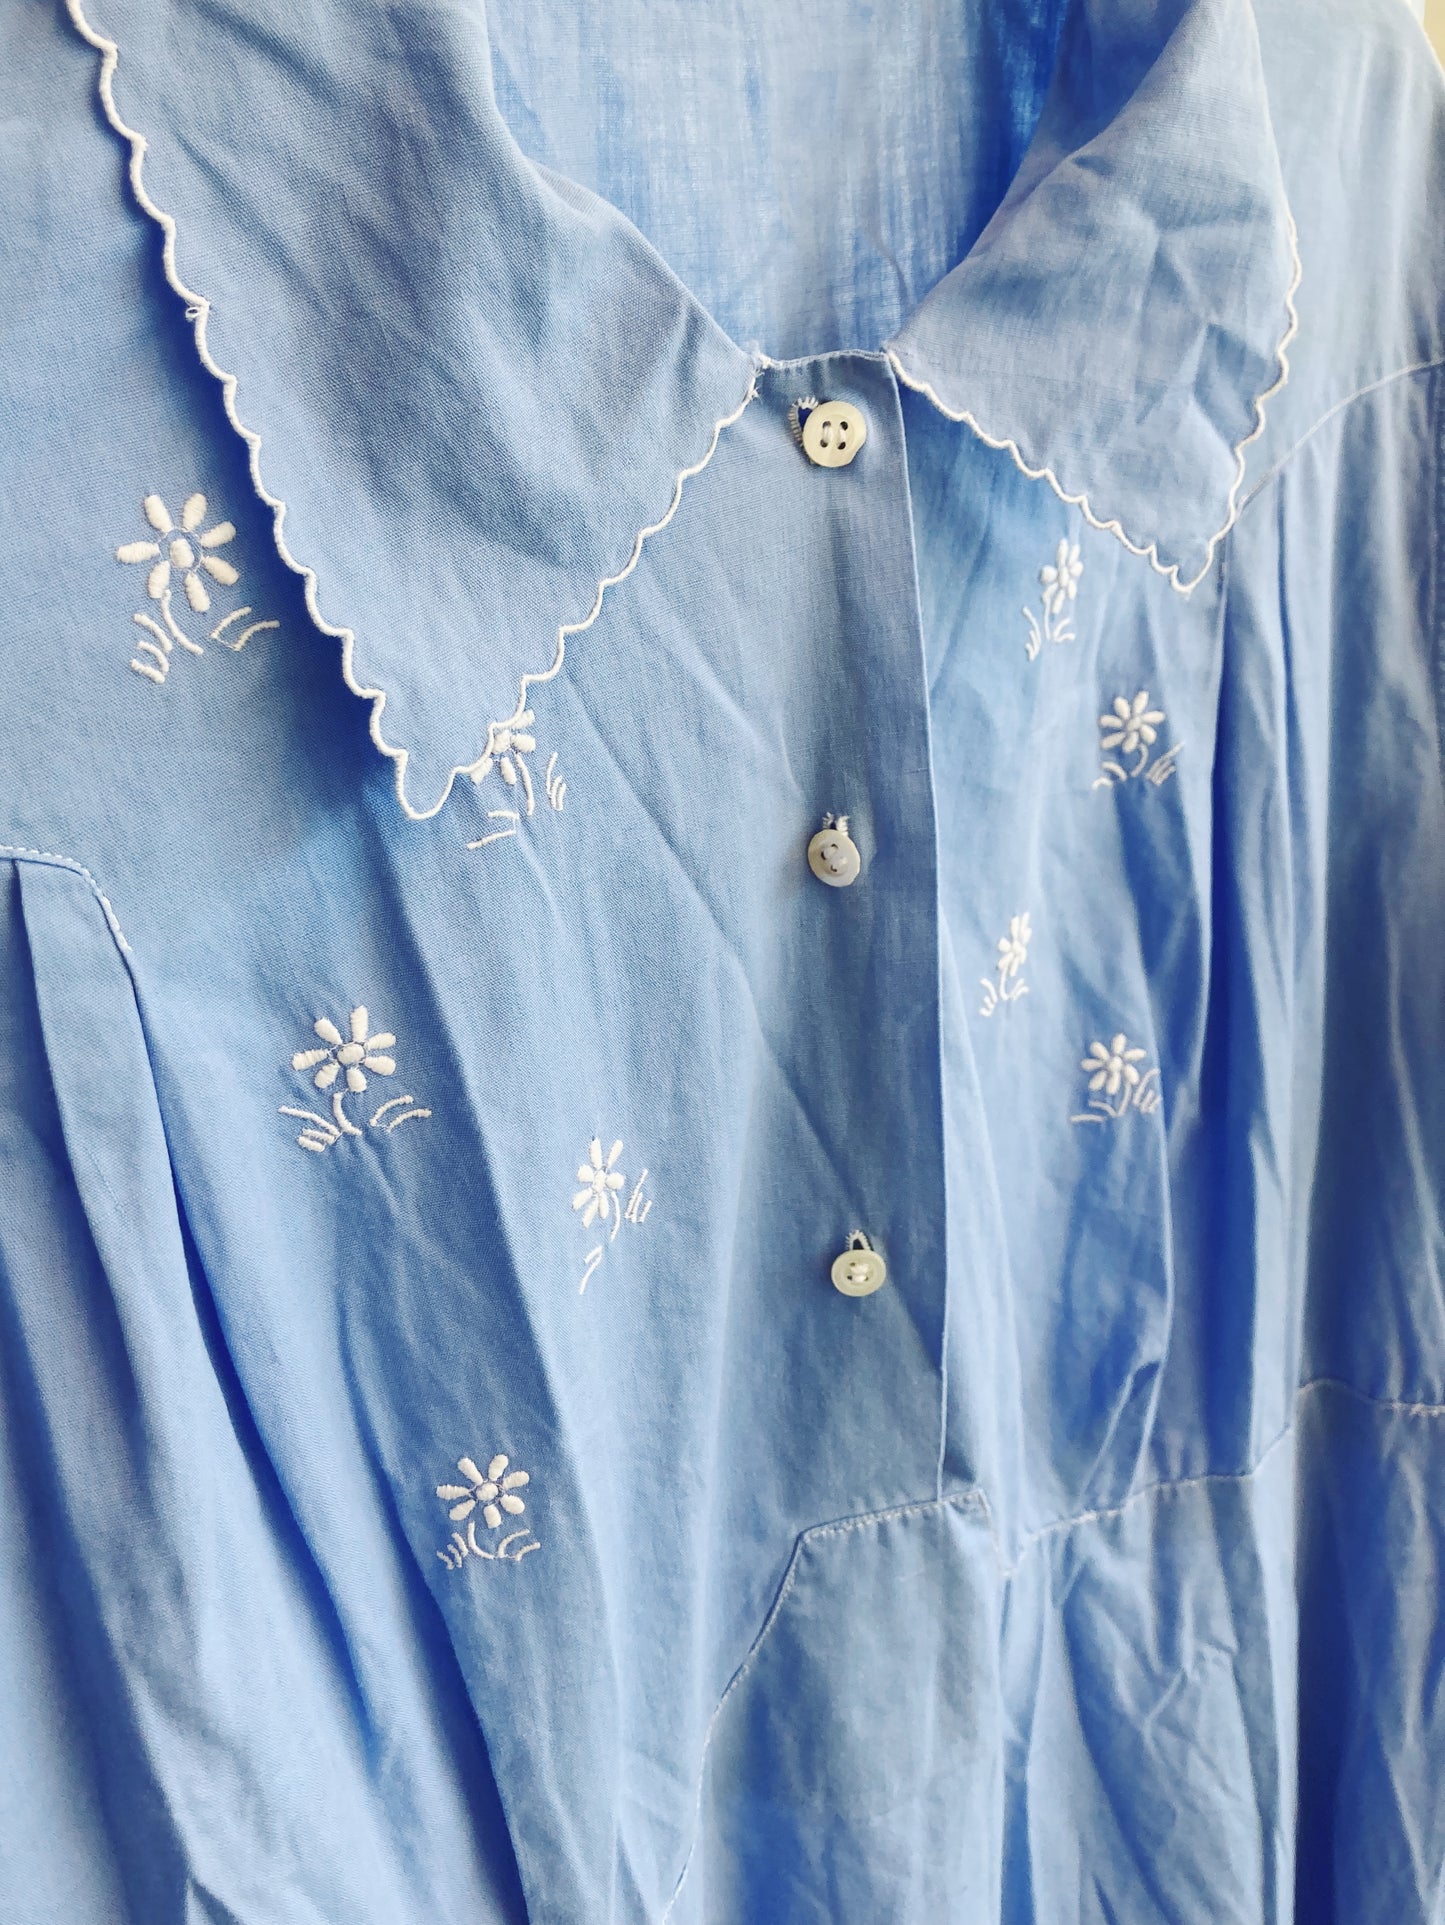 NEW IN! Blue nightgown